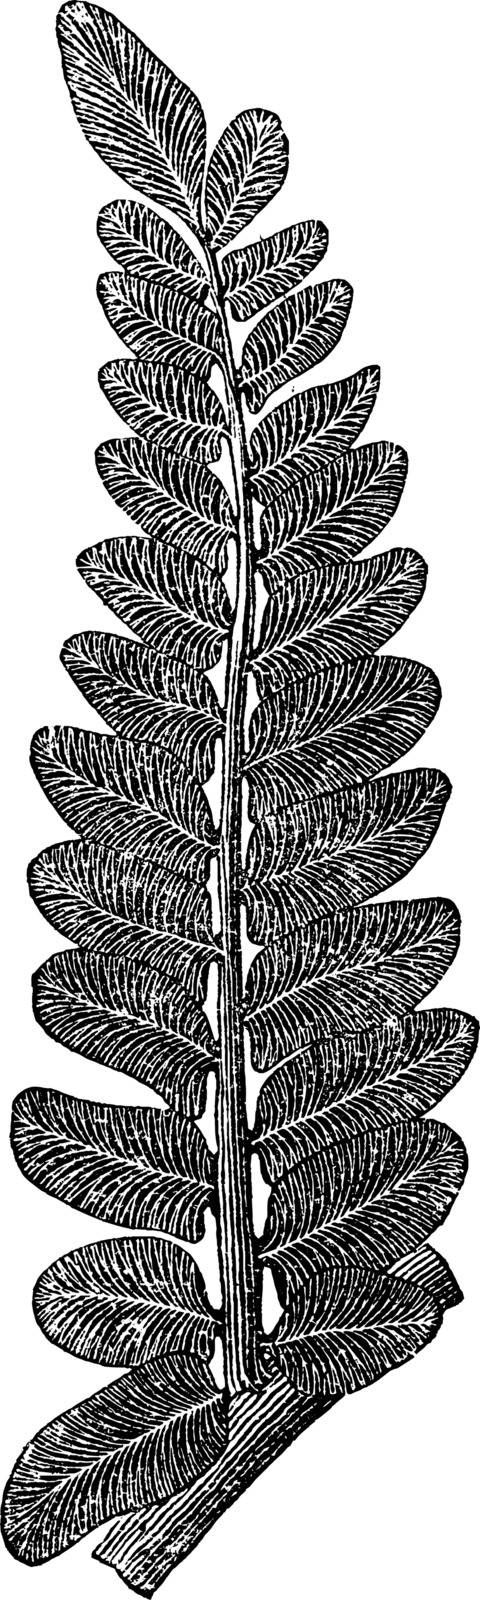 A picture of Fern Fossil and known as Neuropteris, vintage line drawing or engraving illustration.